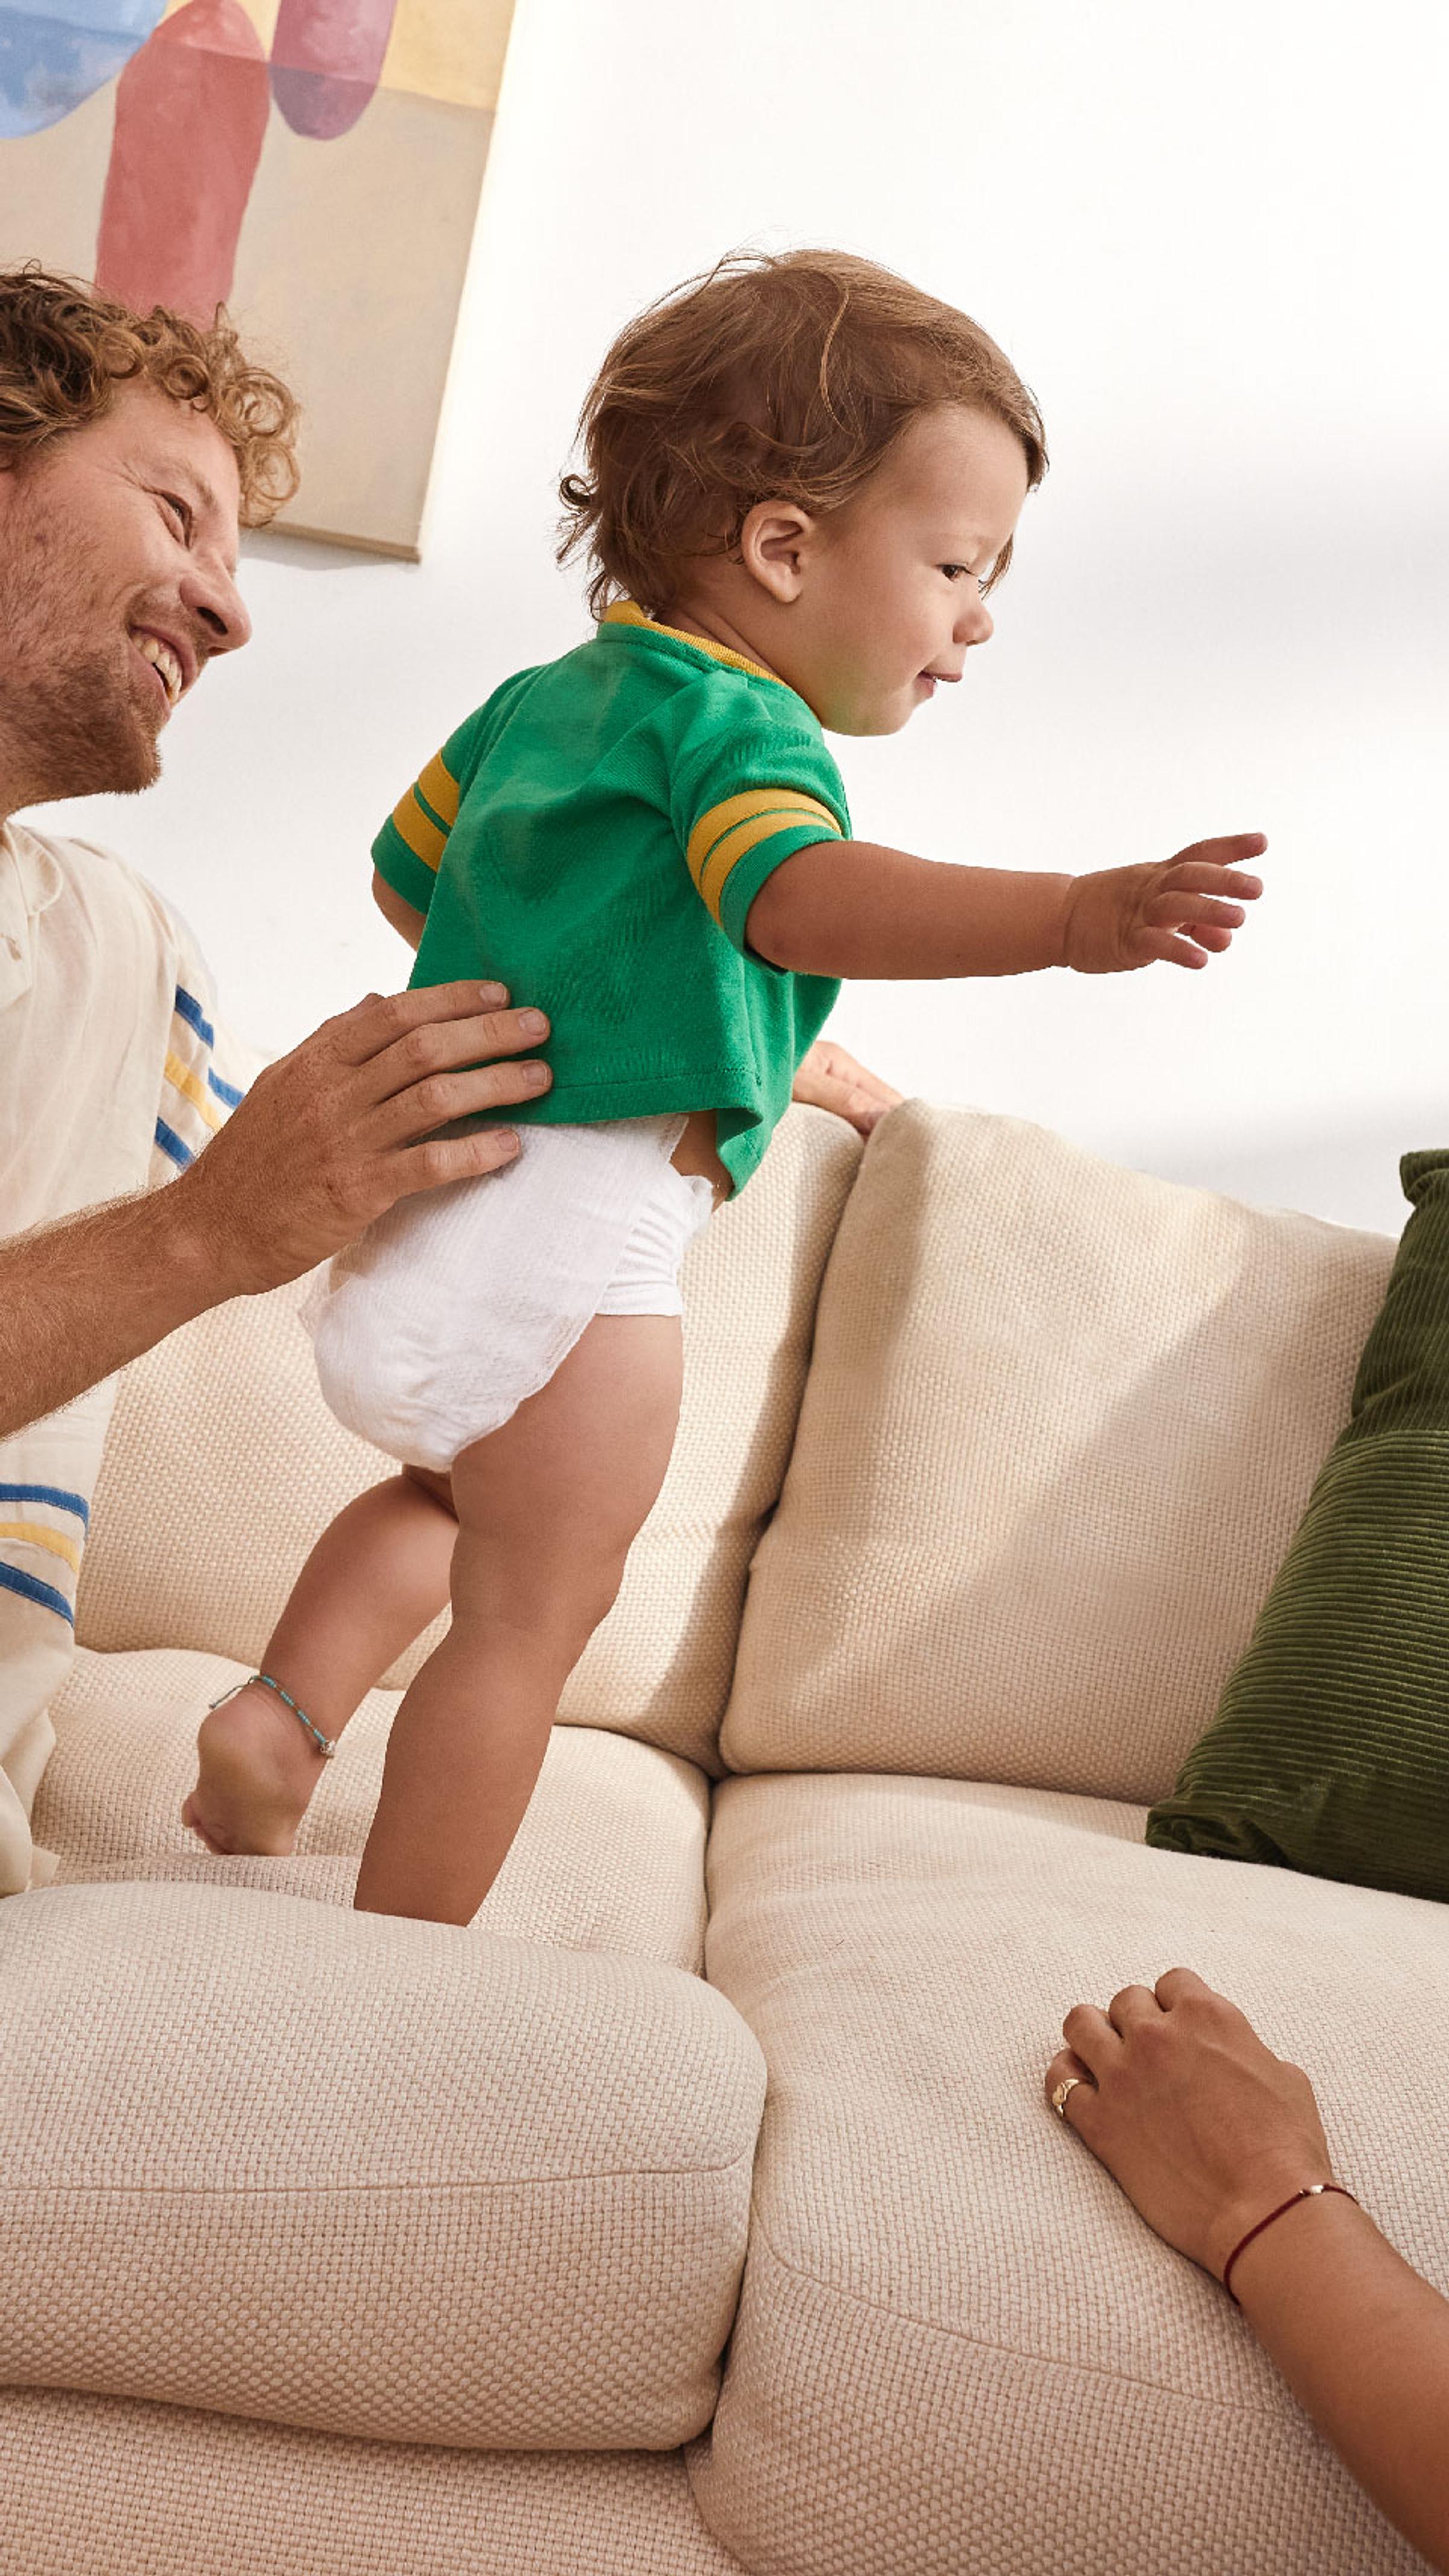 a baby stands up on a couch with the support of his mother and father.